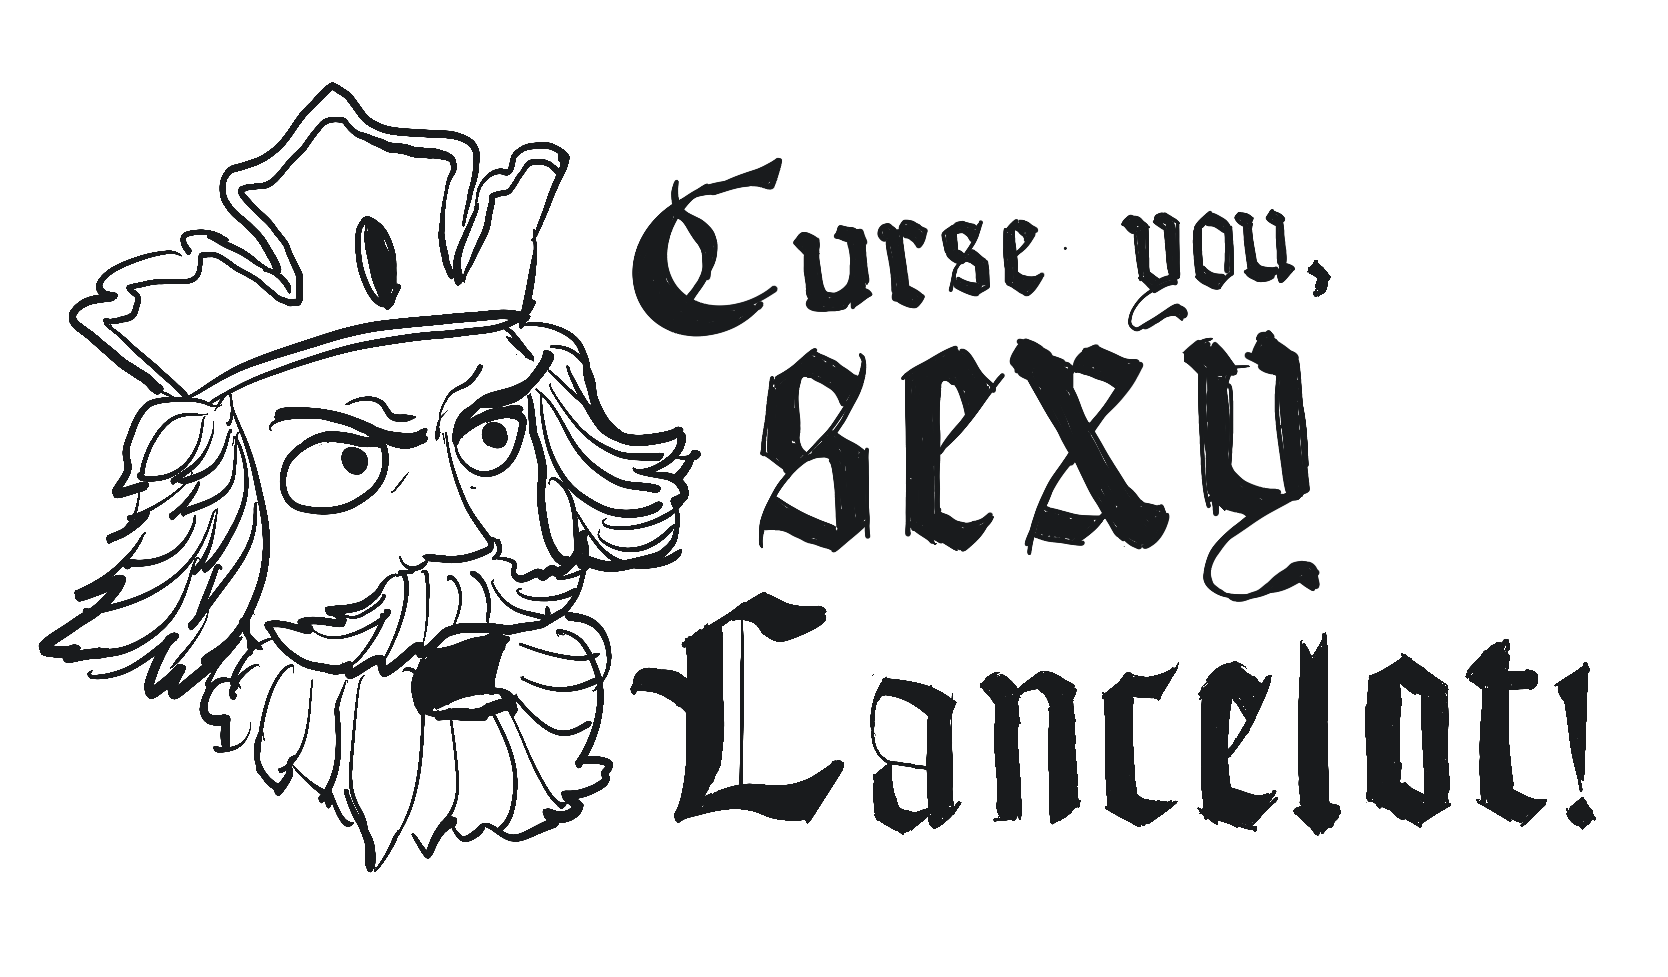 A doodle of a bearded, yelling King Arthur next to "Curse you, sexy Lancelot!" in a medieval-like font.